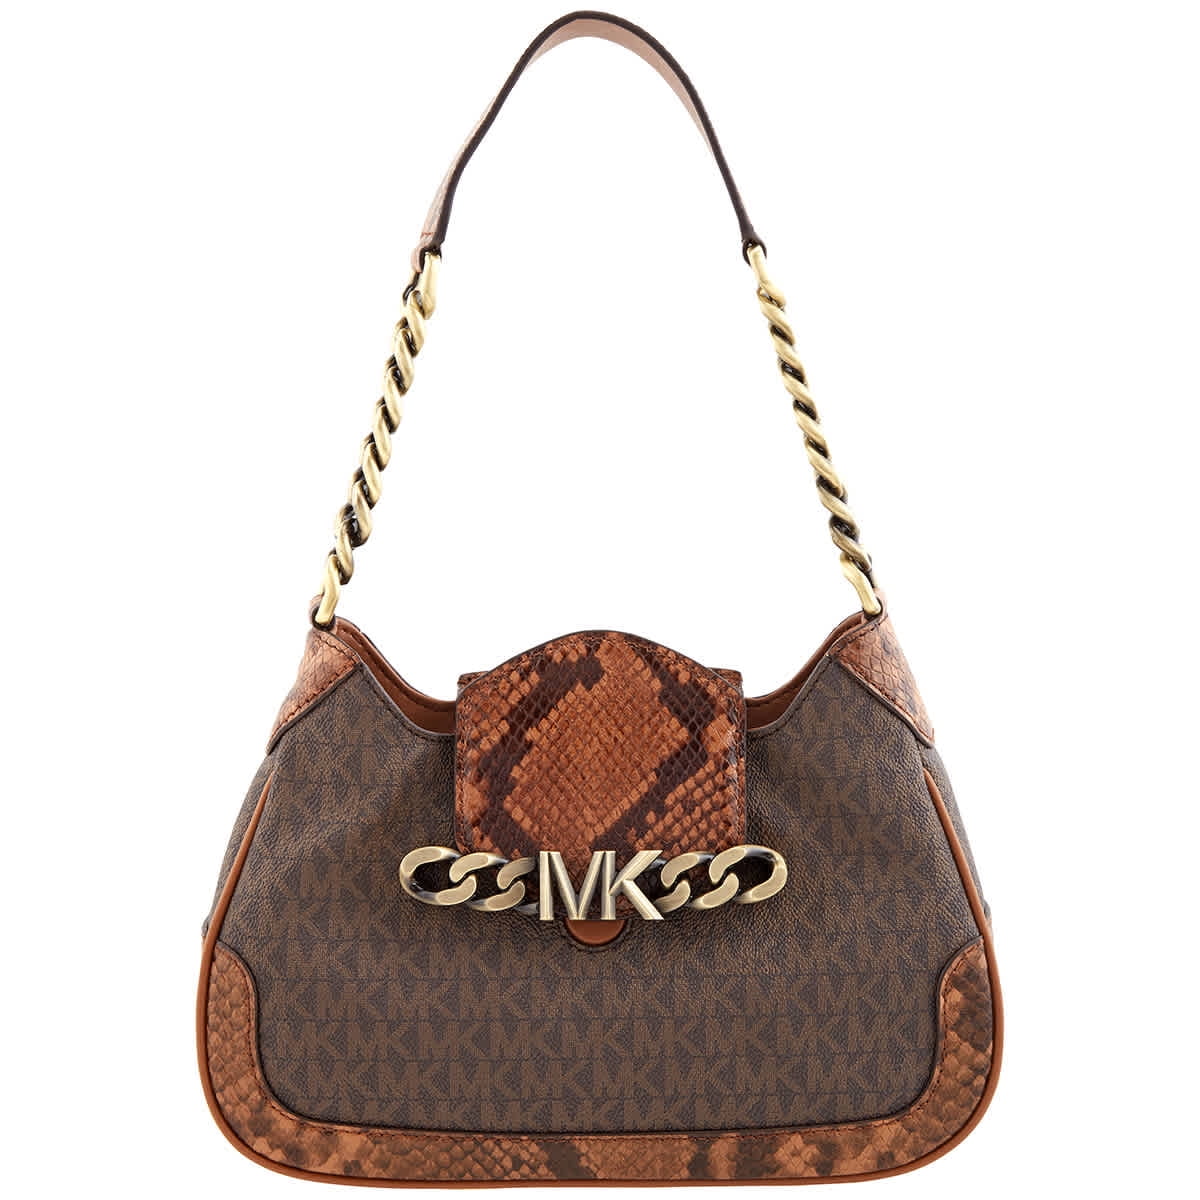 MilaKate Embossed Shoulder Handbags with Inner Pouch for Women